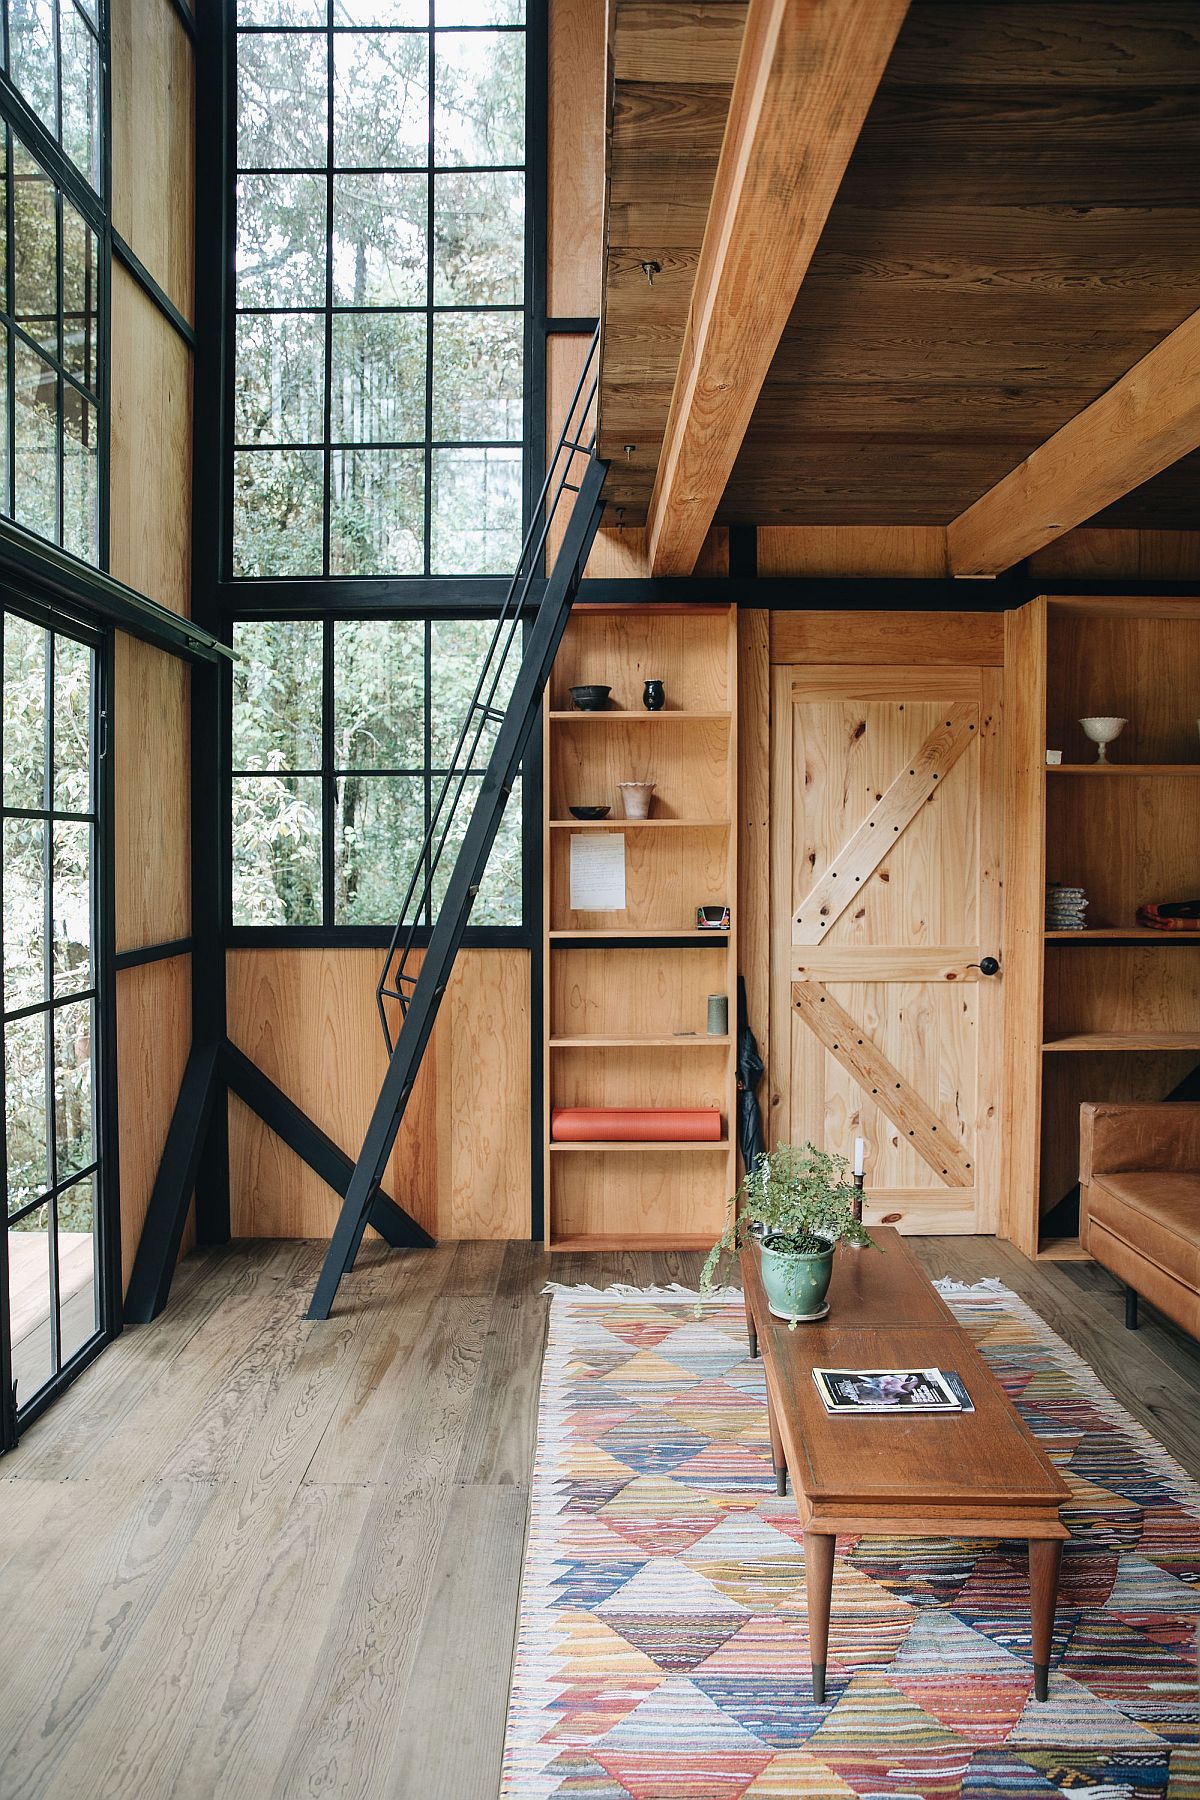 Locally sourced pine wood coupled with glass and metal windows inside the stylish cabin